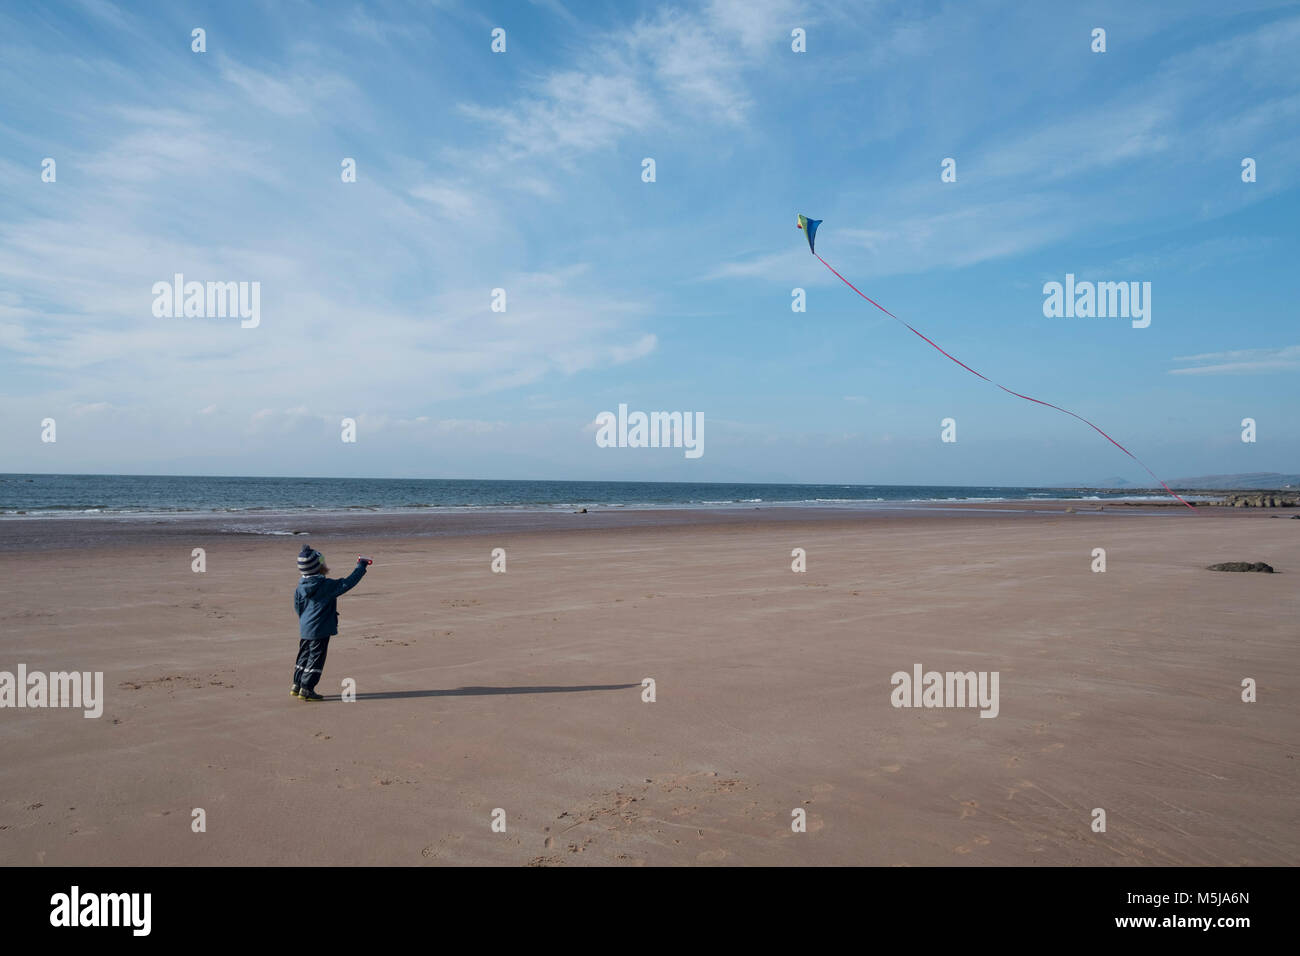 A young boy flying his kite on the beach at Seamill, Scotland. Stock Photo